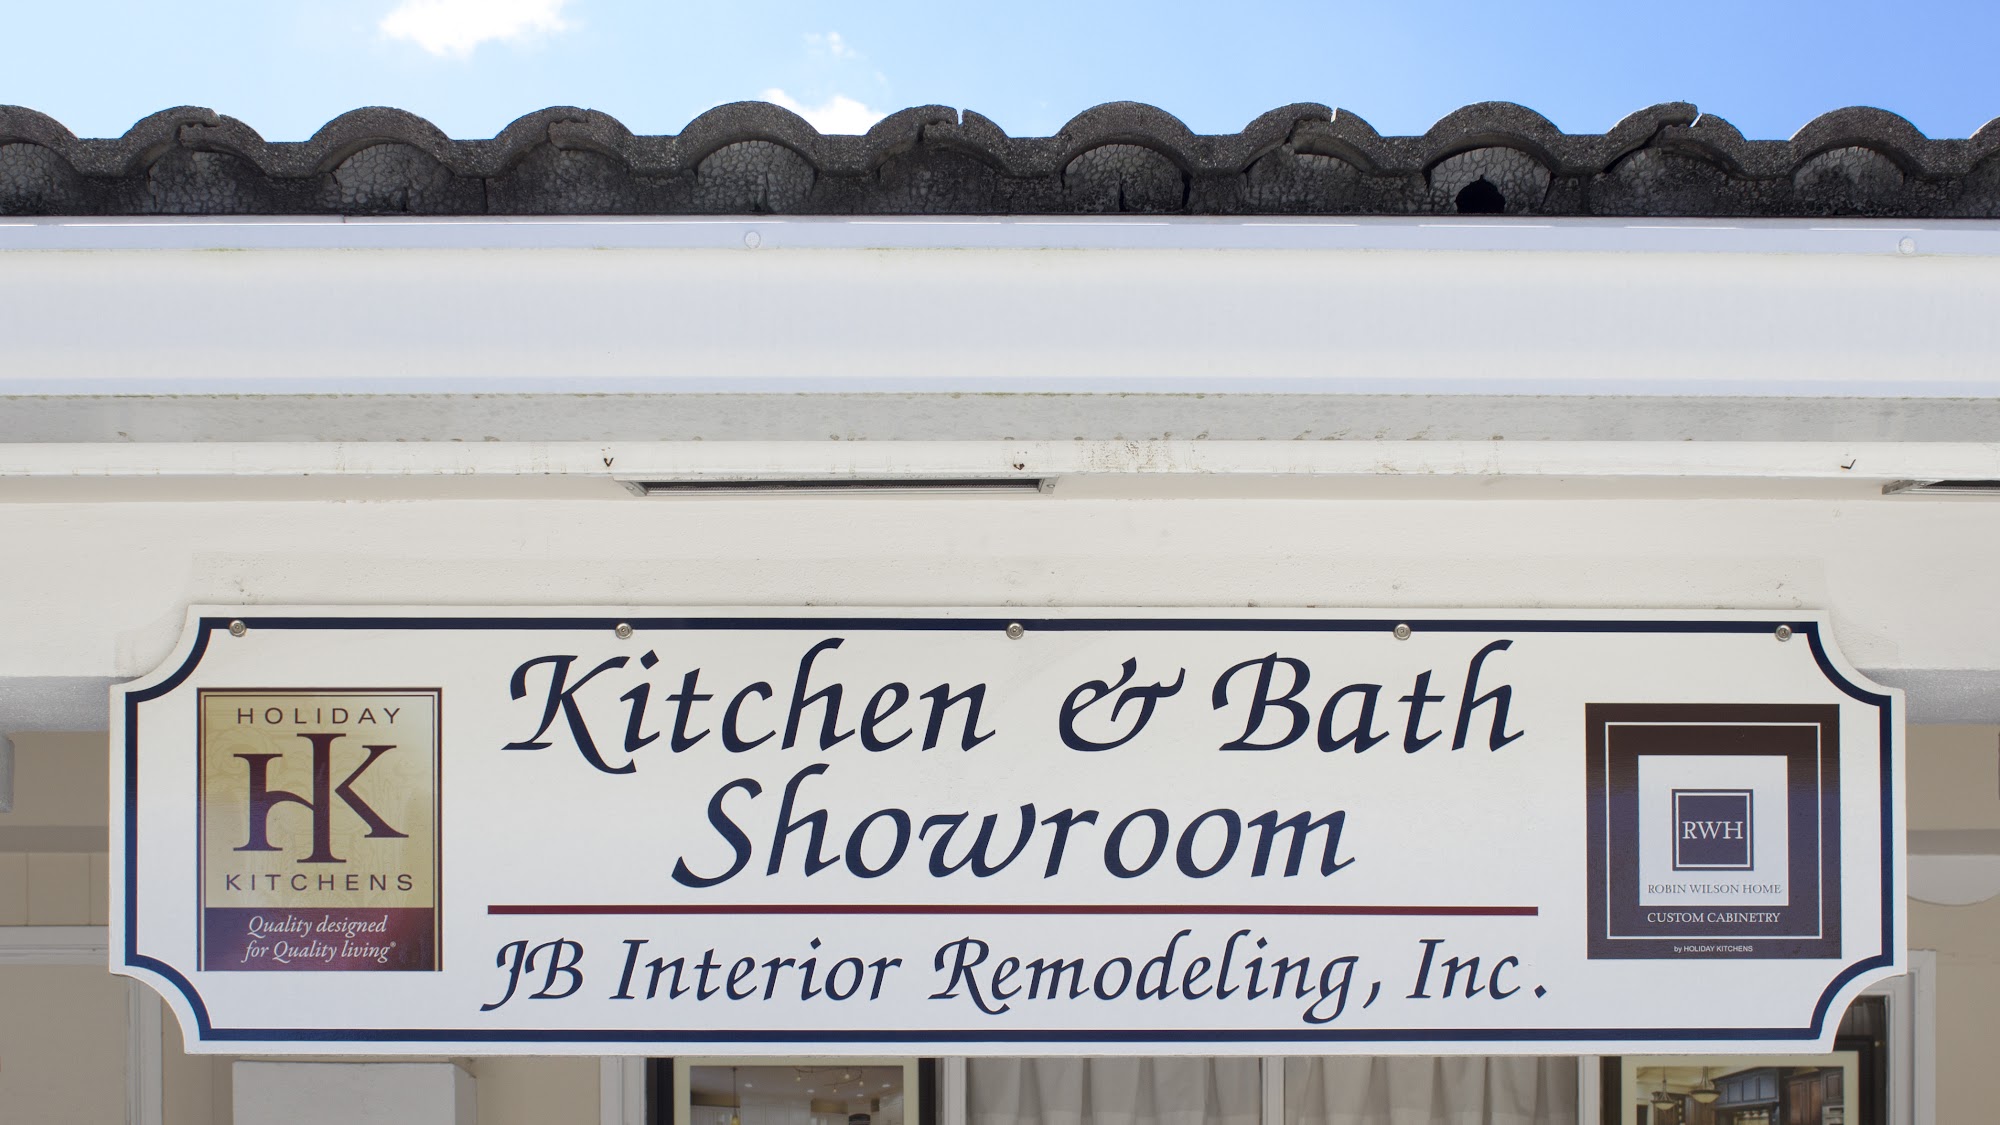 JB Interior Remodeling Gallery Sq. South, 380-A Tequesta Dr, Tequesta Florida 33469